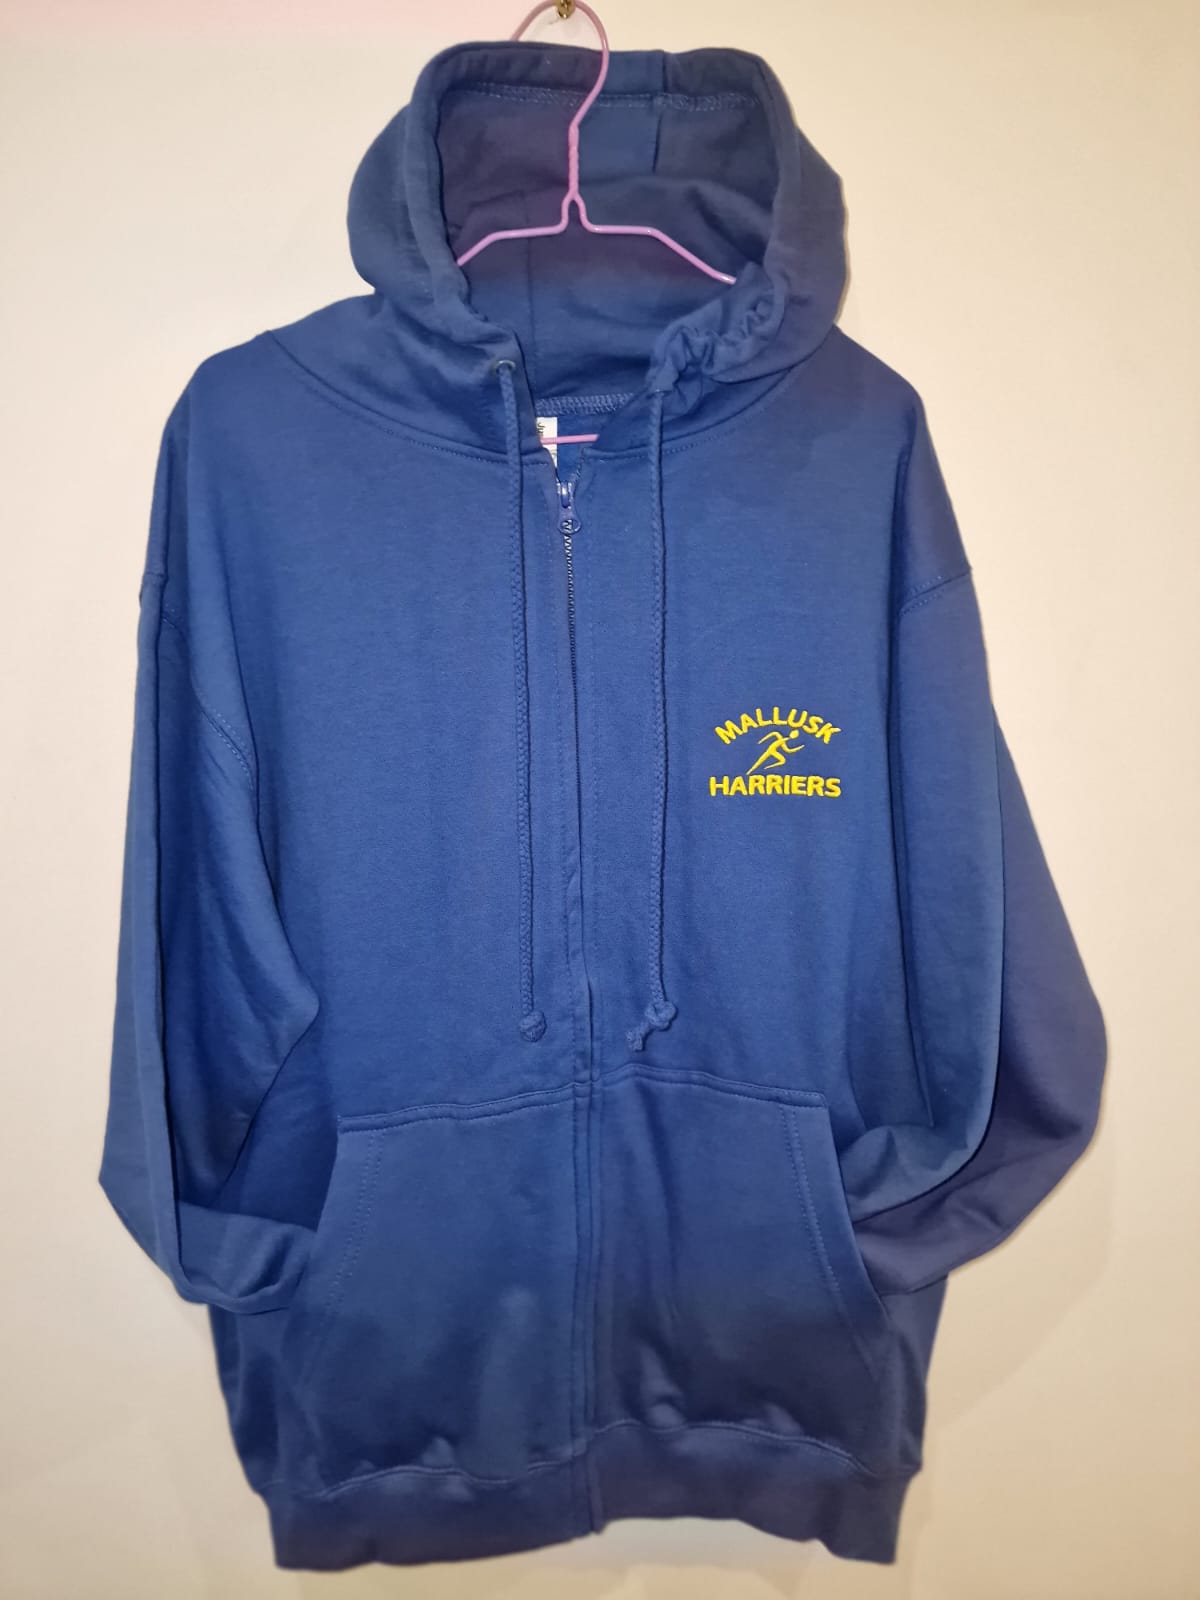 Zipped Hoodie (Initialed - no refunds)